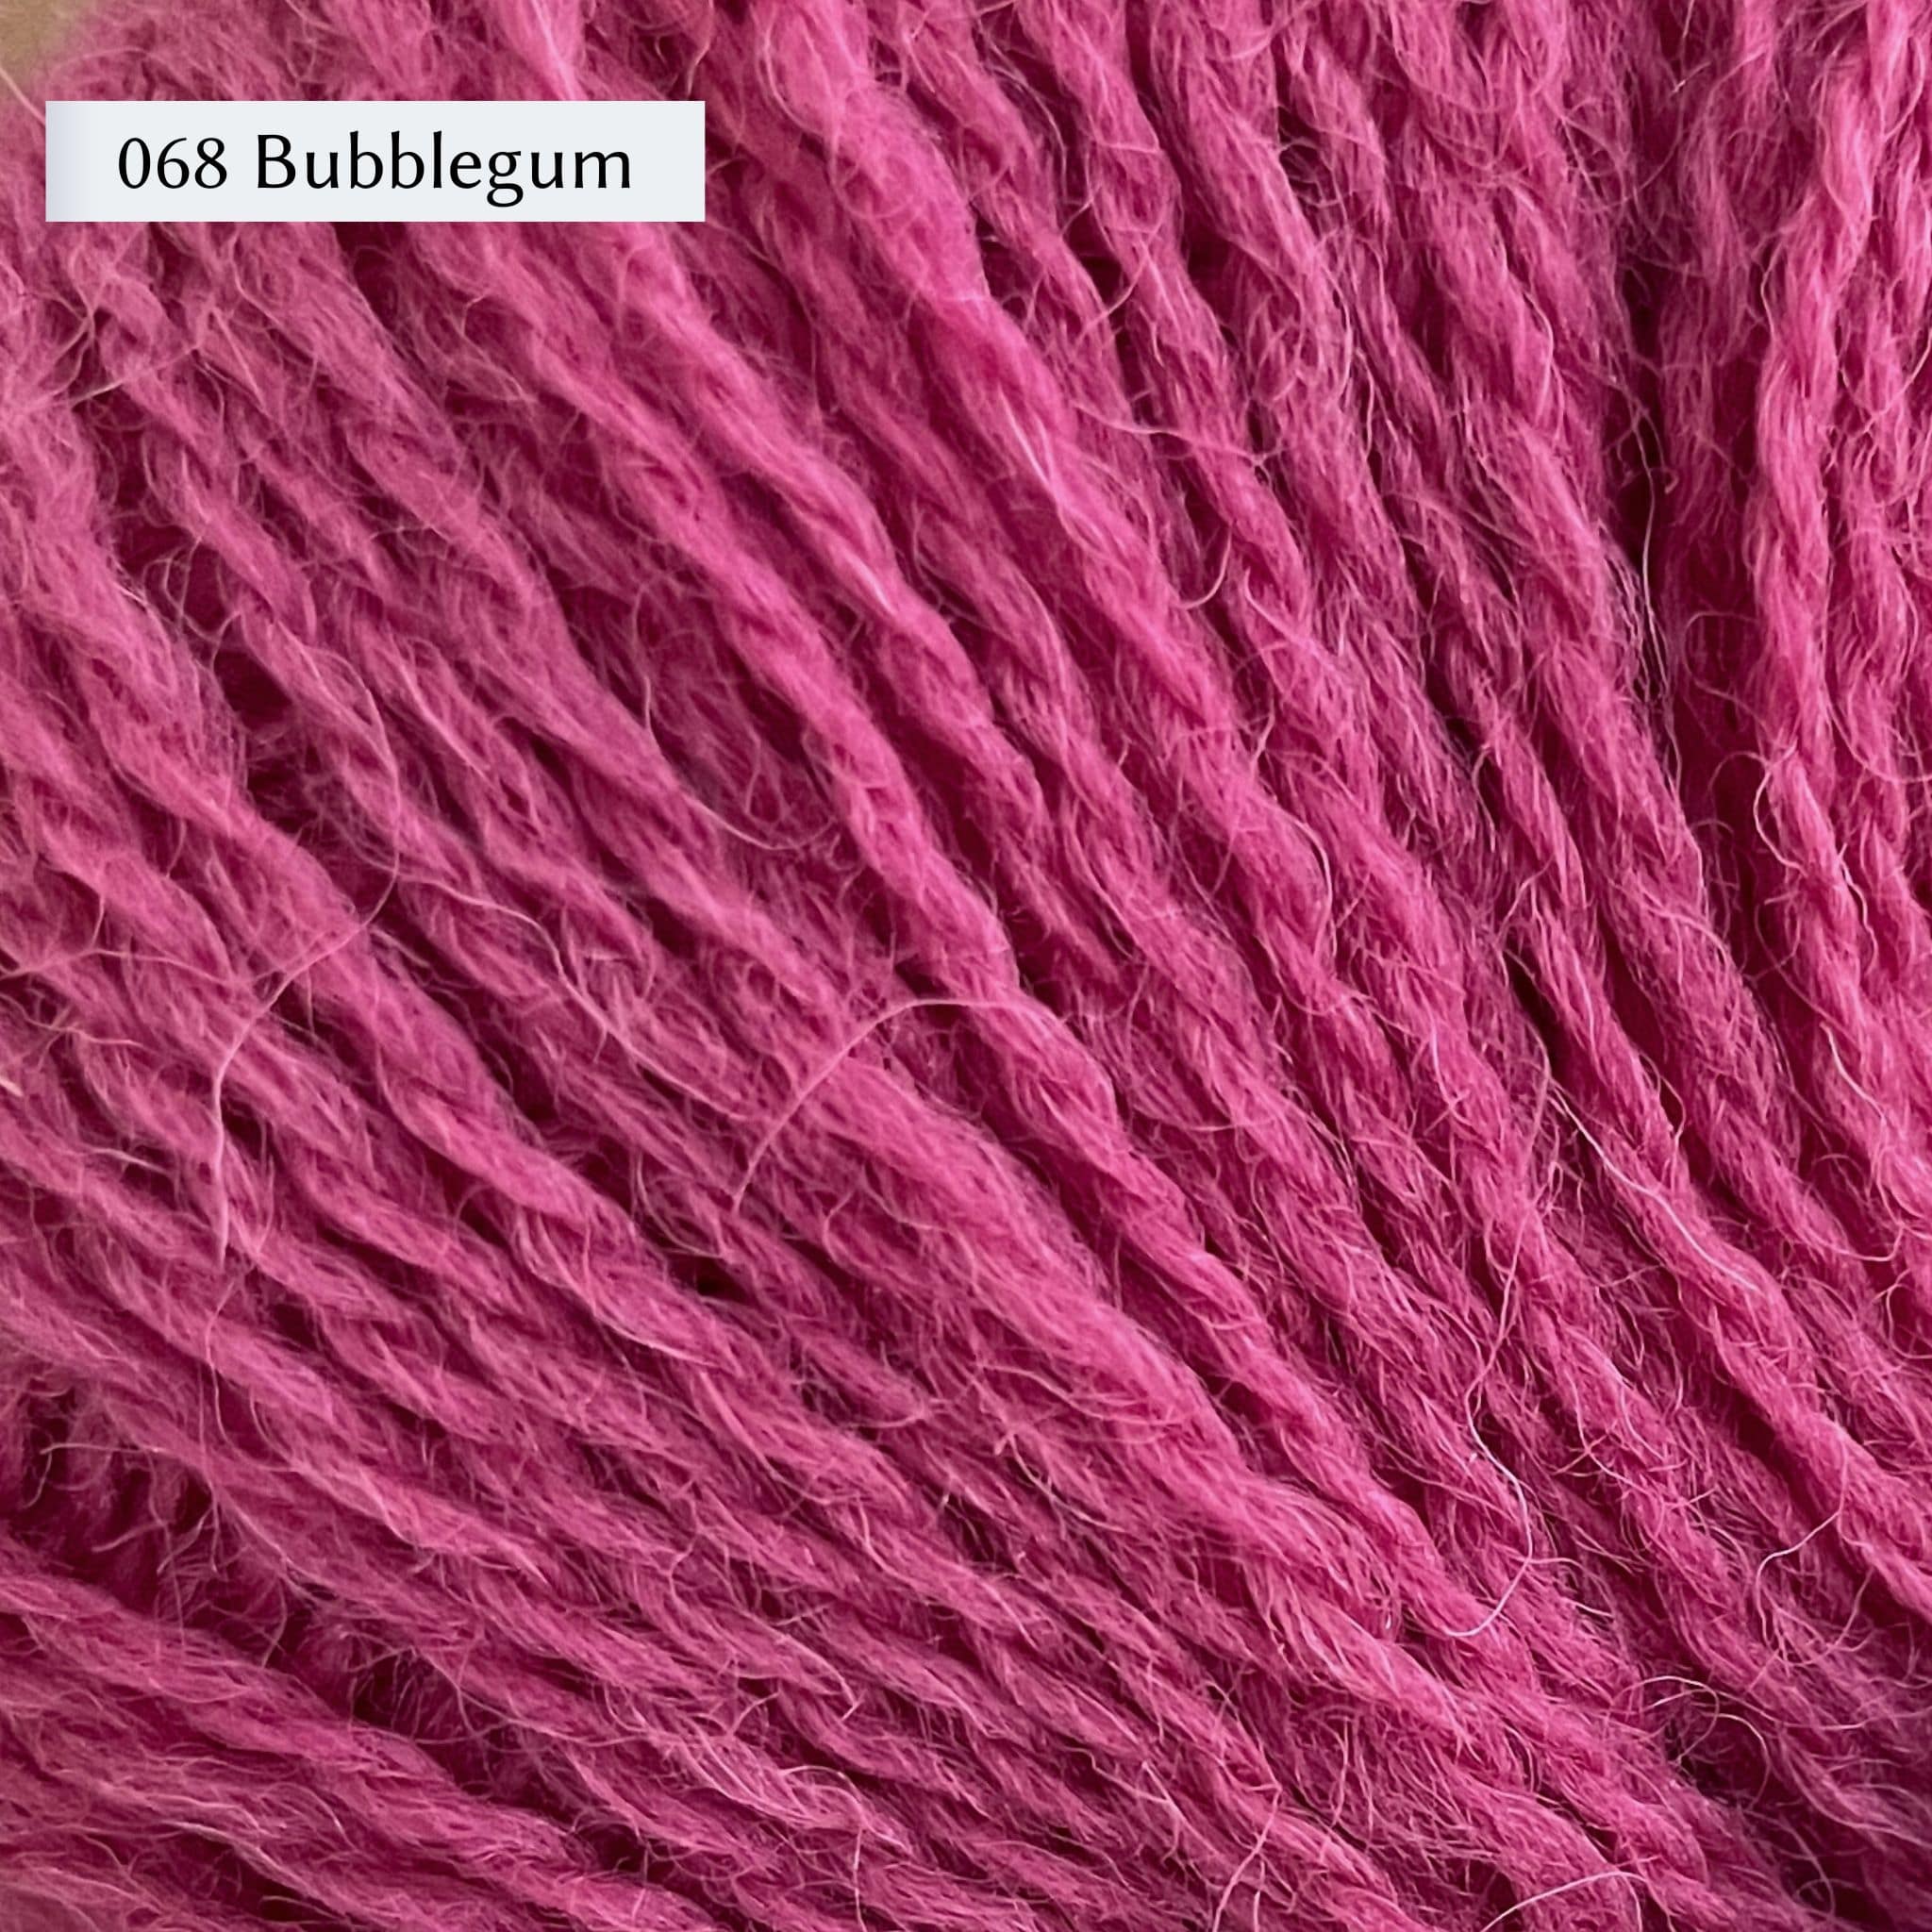 🧶 NEW YARN! I am so excited to show you this brand new yarn